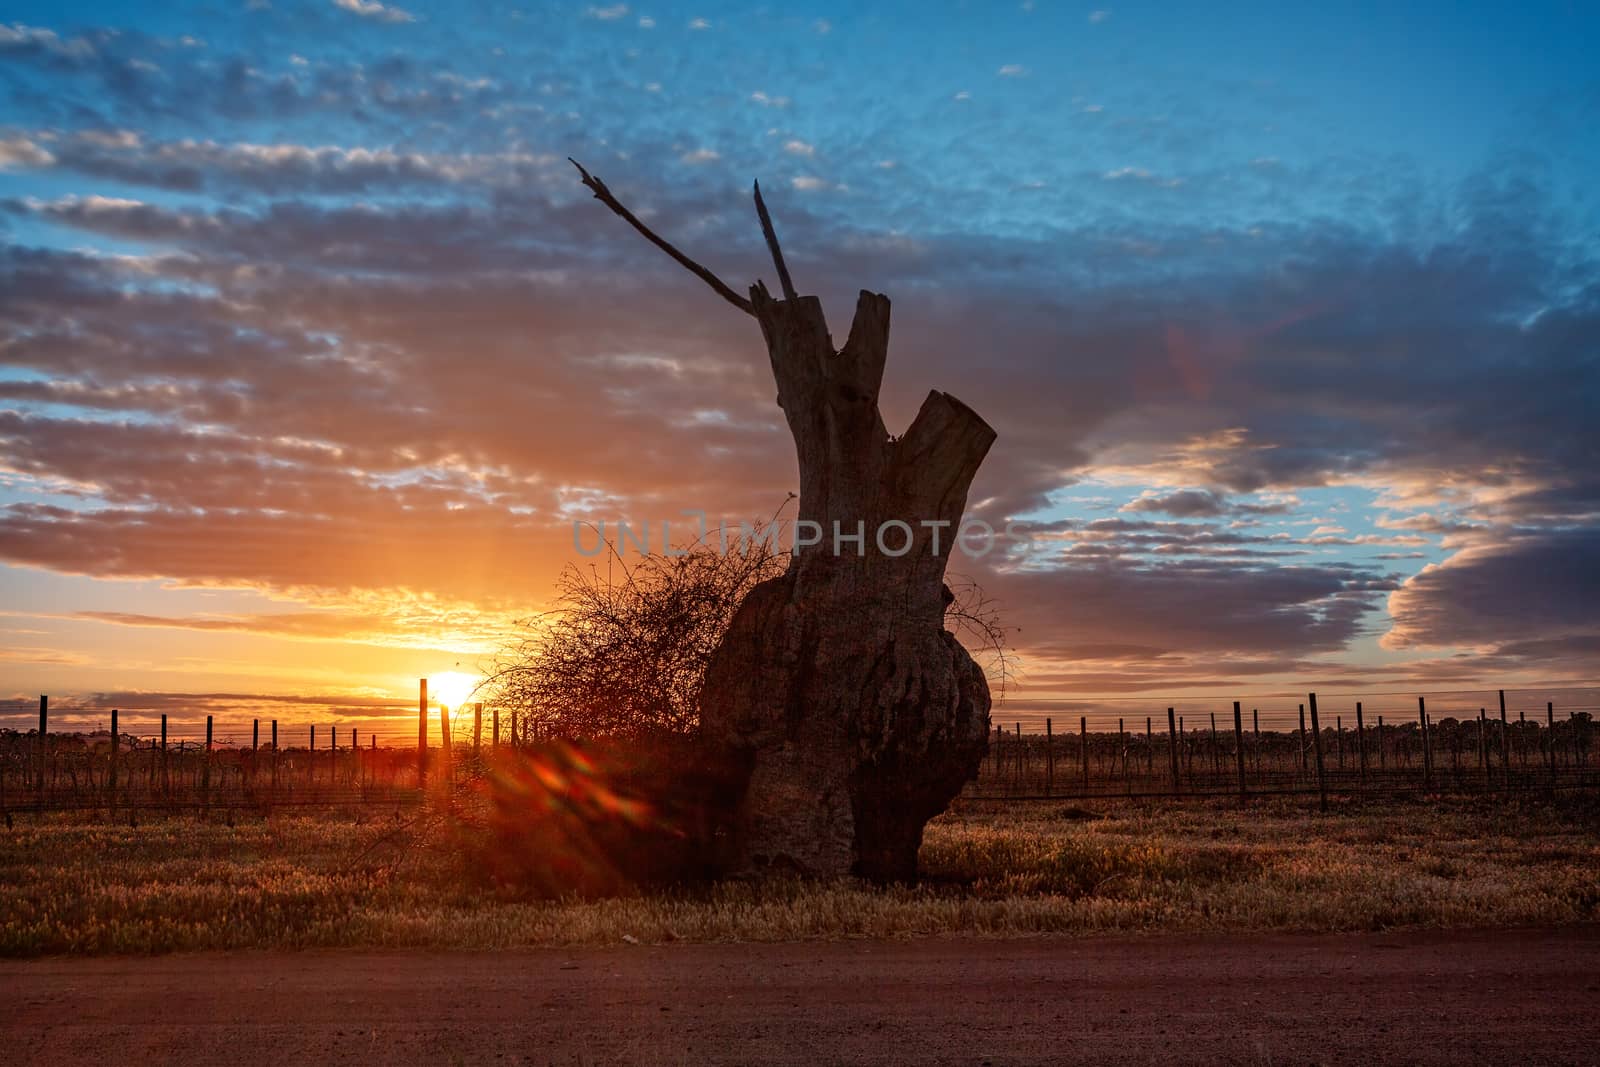 Bulbous tree trunk and grape vines in the sunrise by lovleah